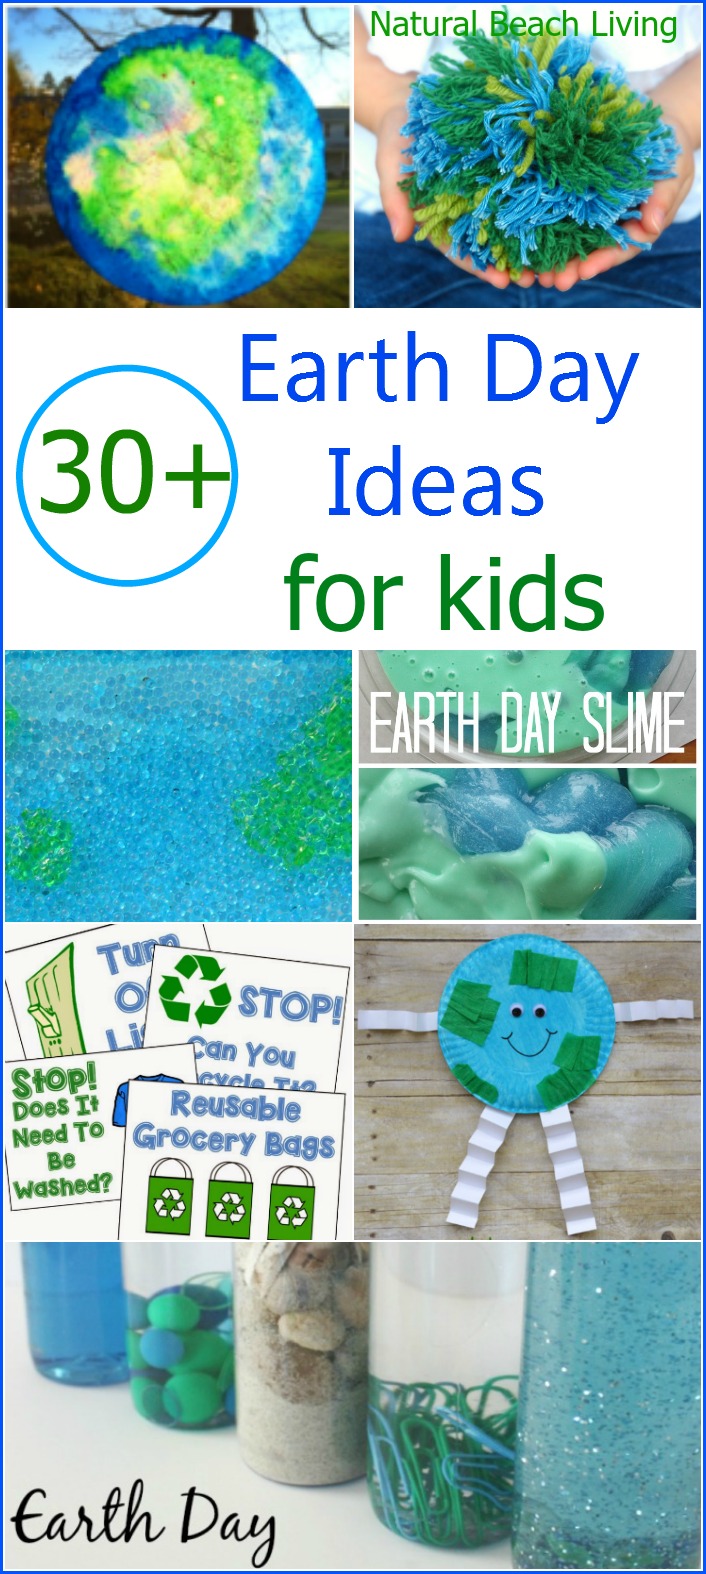 40+ Earth Day Ideas and Earth Day Activities for Kids